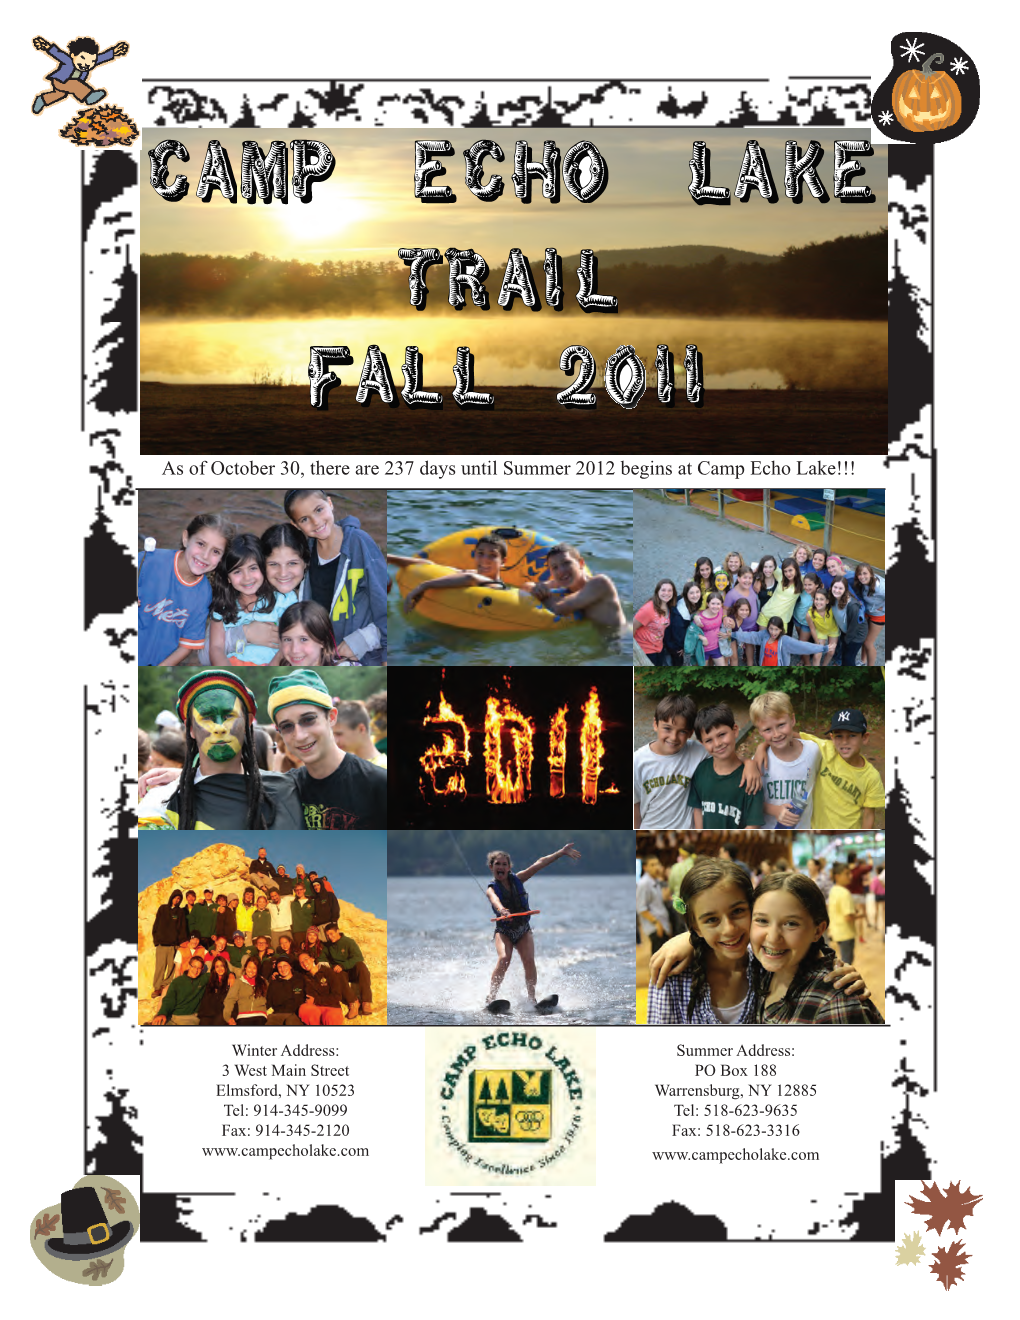 As of October 30, There Are 237 Days Until Summer 2012 Begins at Camp Echo Lake!!!